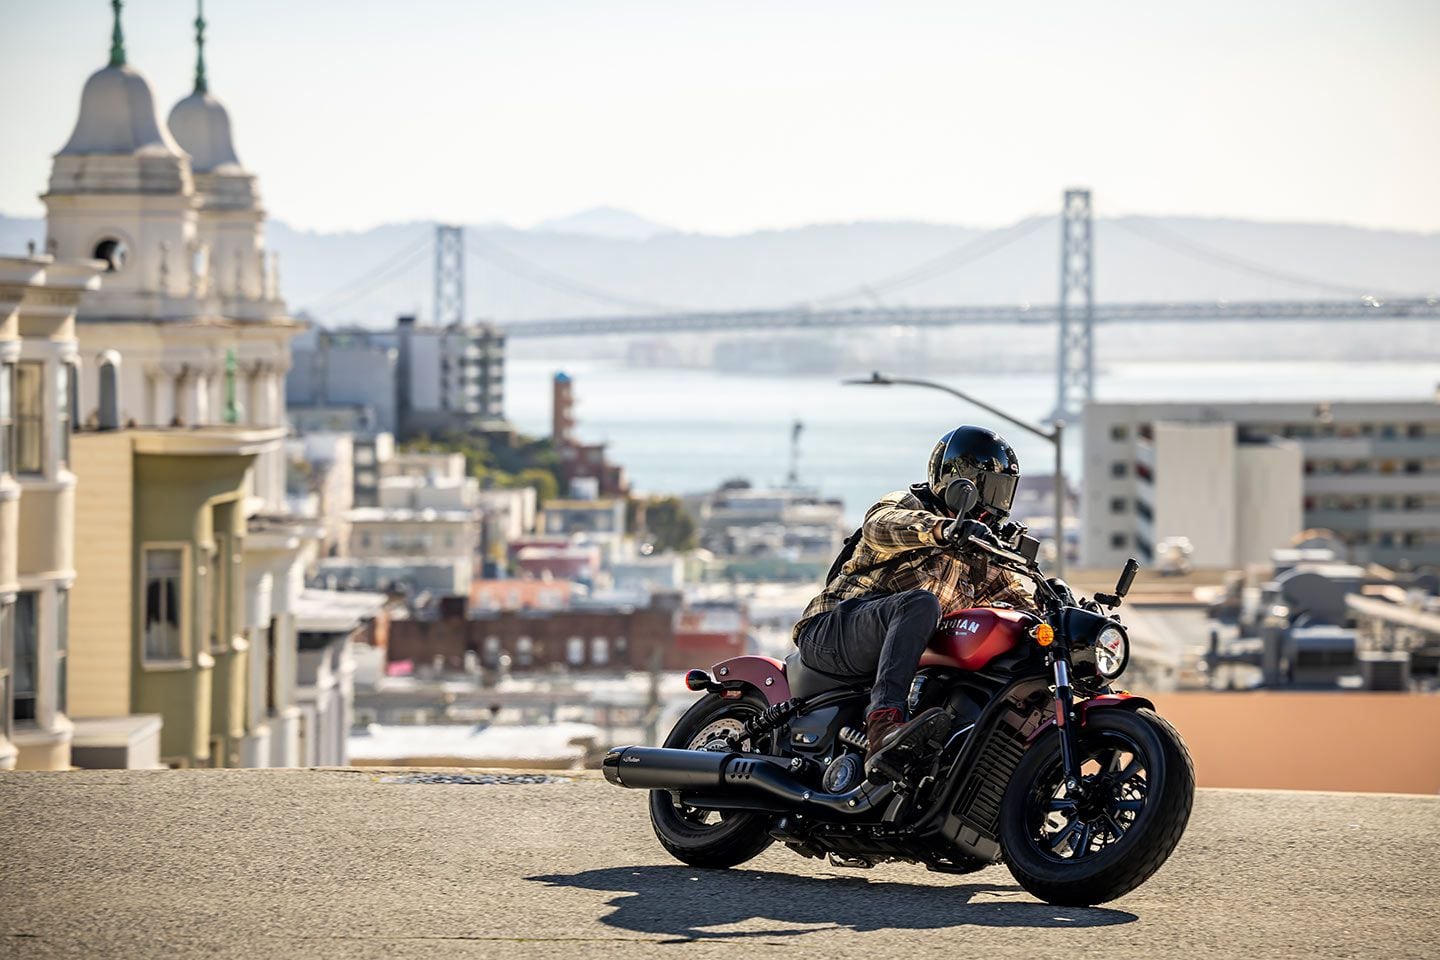 Indian Motorcycle has renewed its Scout lineup with five models built around a new frame and engine. The Scout Bobber (shown) comes into the new model year as the most popular Scout in recent years.